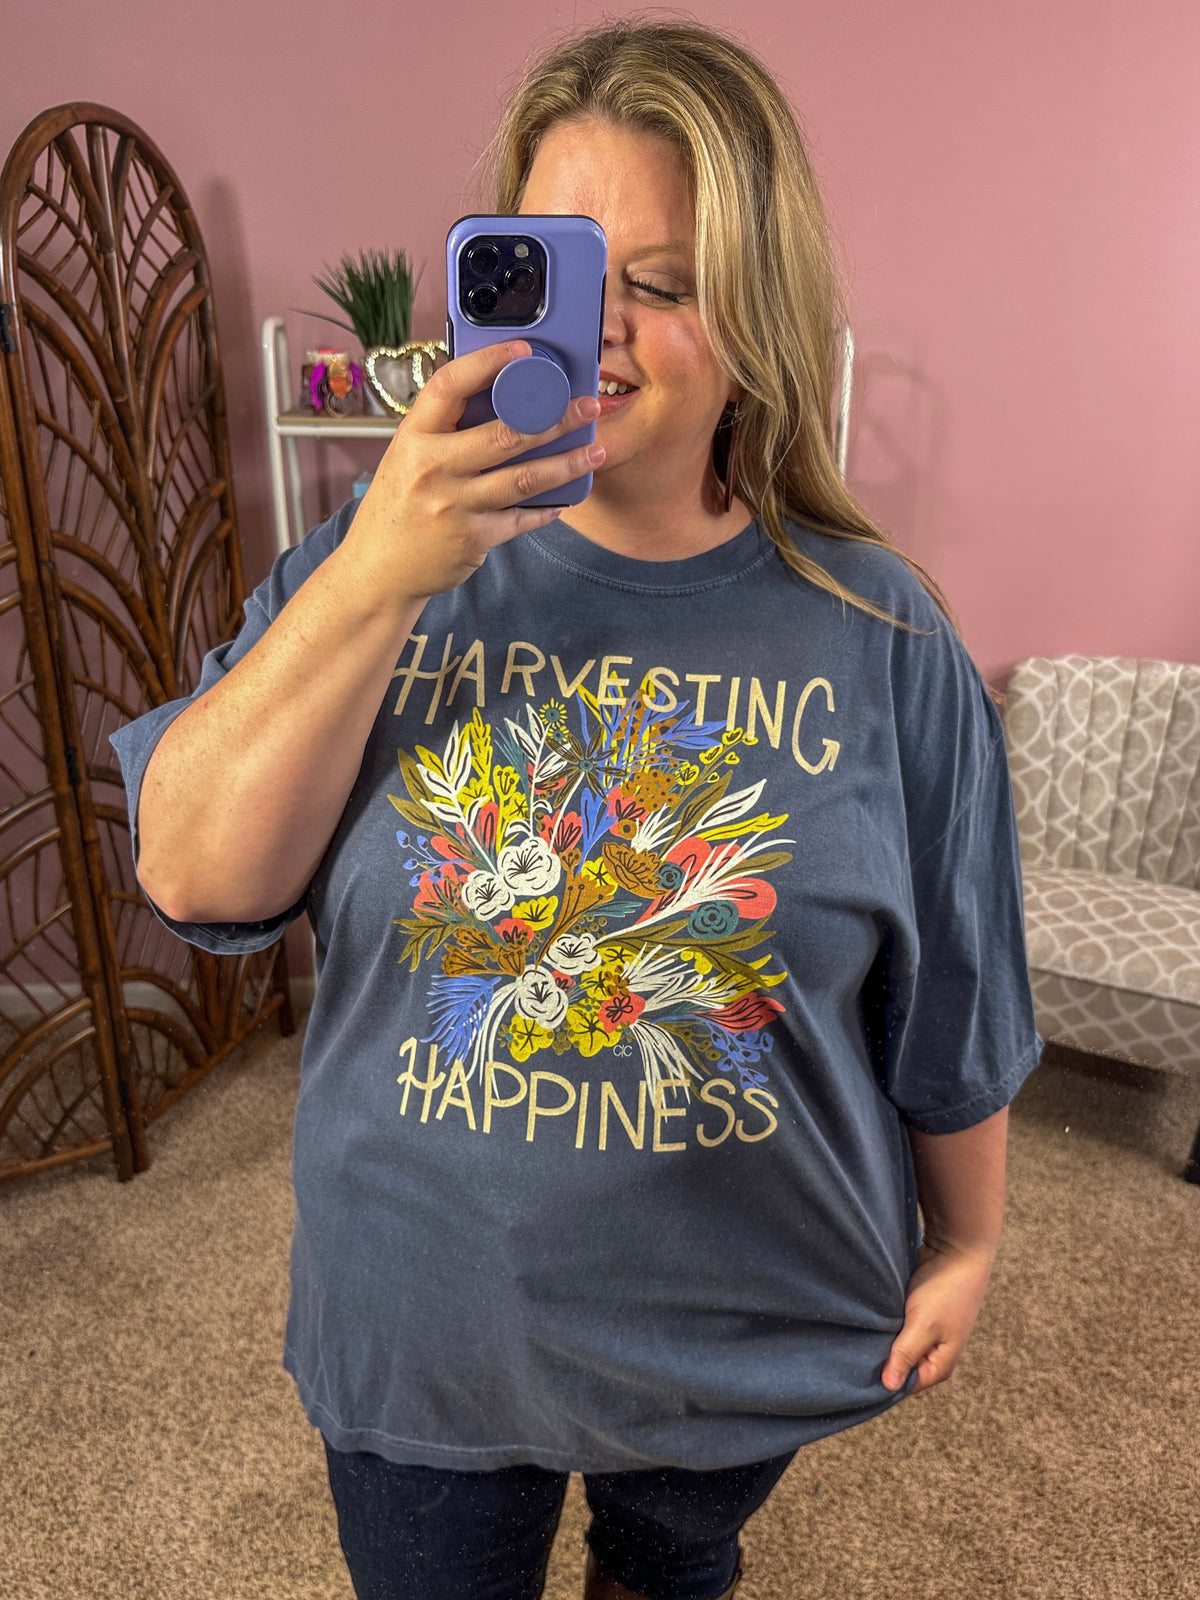 Harvesting Happiness Graphic Tee - Comfort Colors